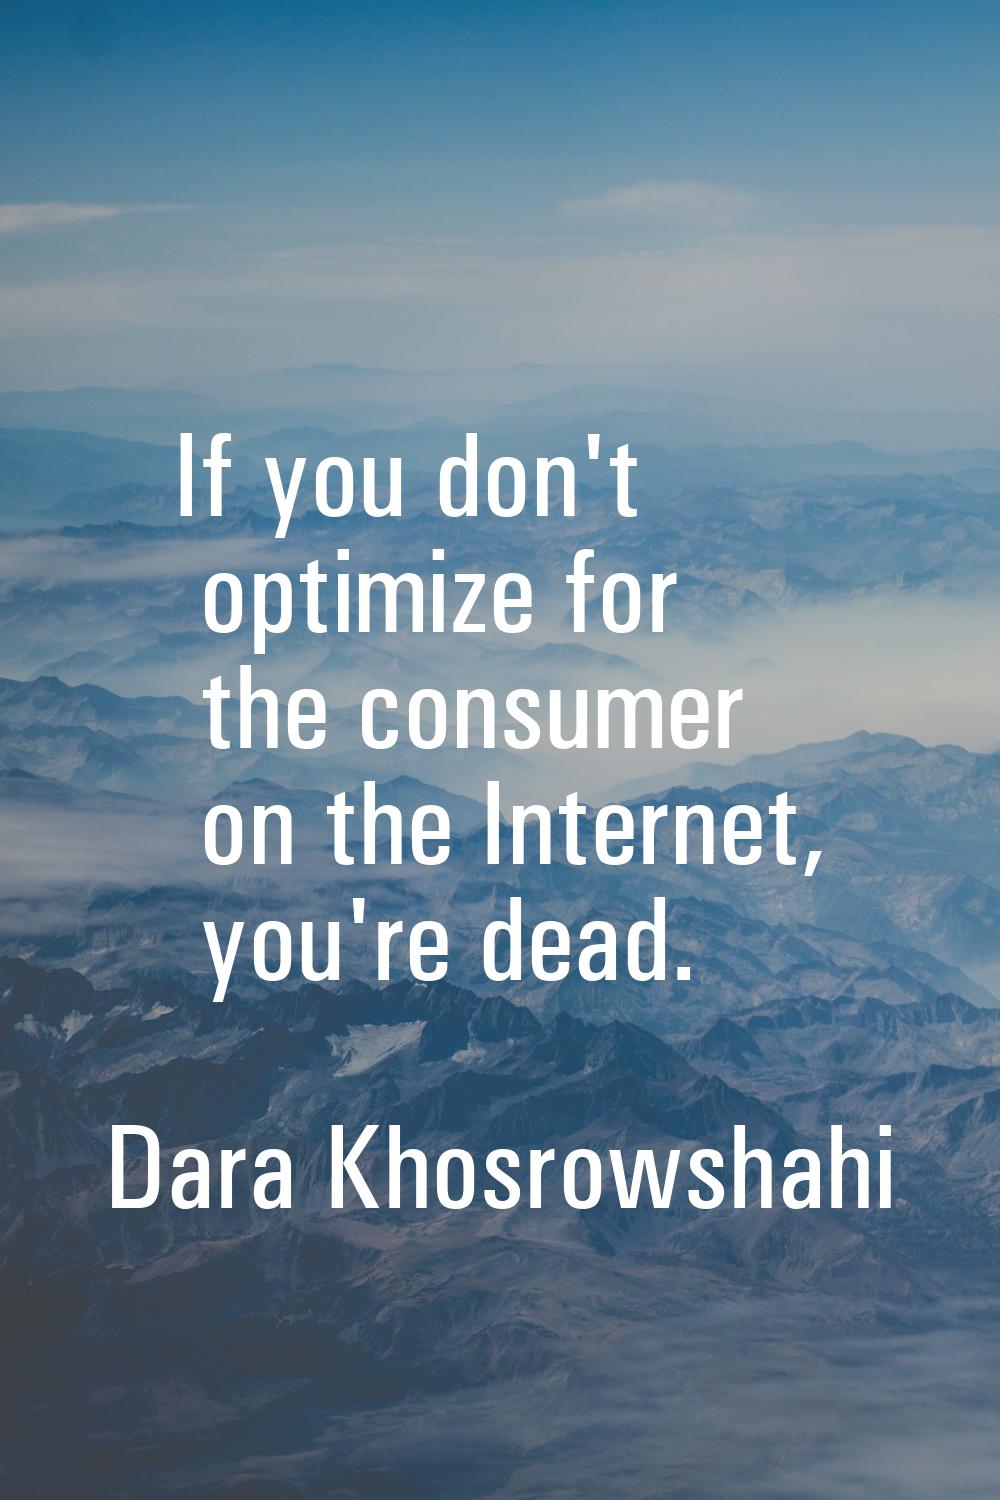 If you don't optimize for the consumer on the Internet, you're dead.